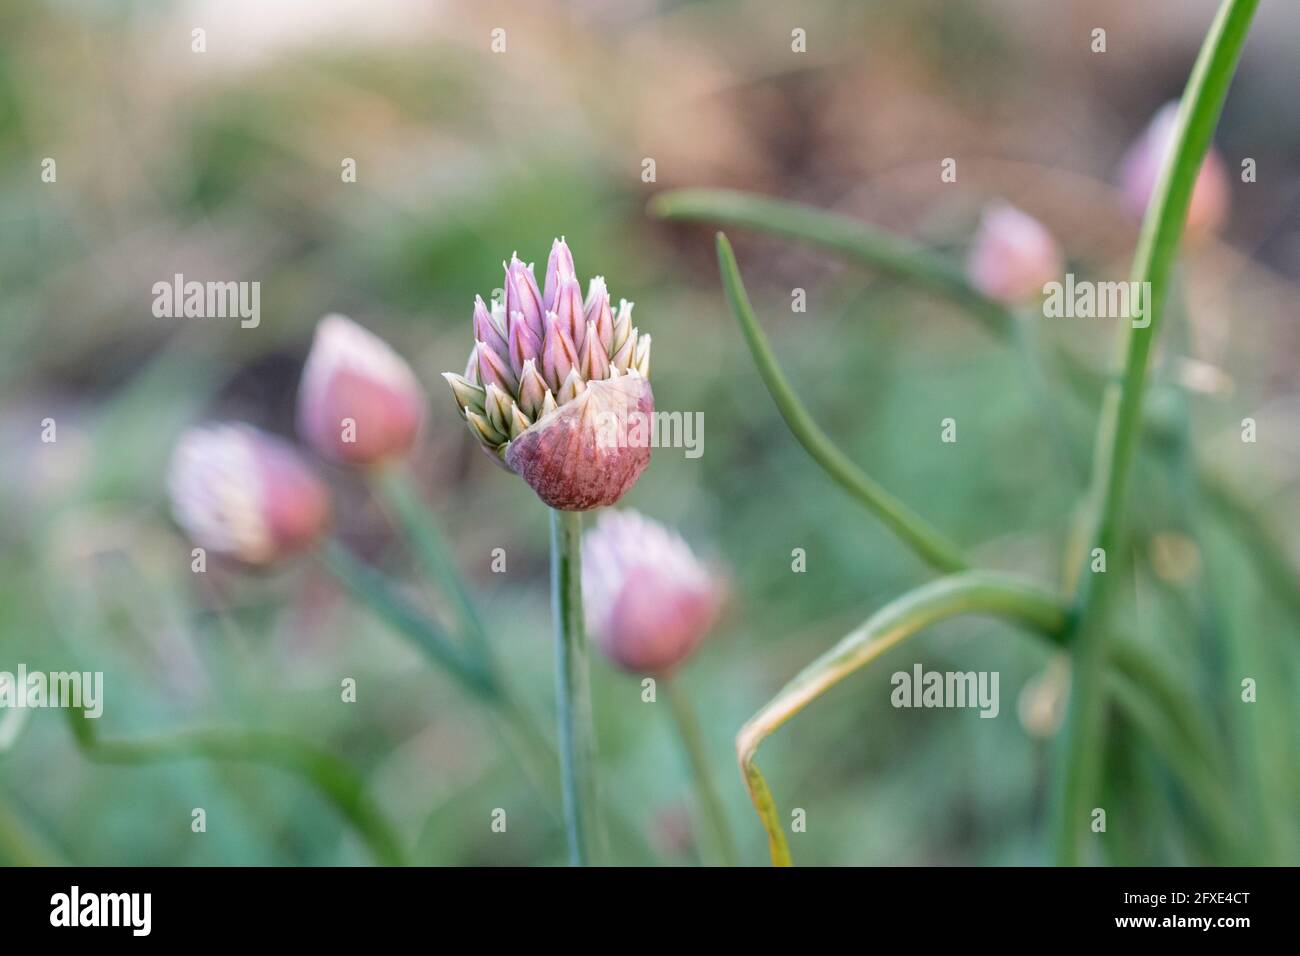 The bud of a chive plant opening against a blurry background in a shady garden. Stock Photo